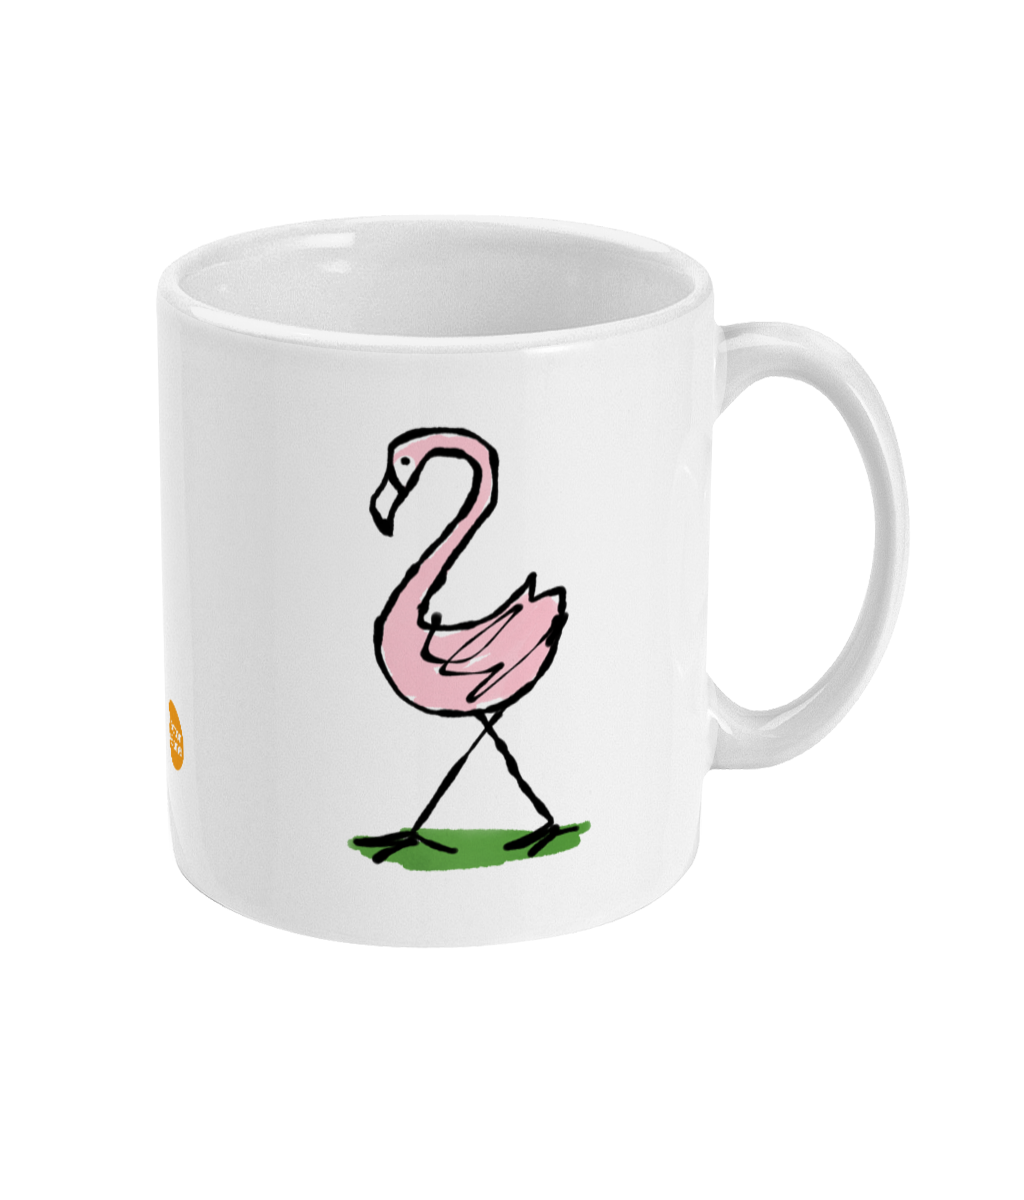 Pink Flamingo Mug - Funny cute owl illustrated coffee mug by Hector and Bone Right View